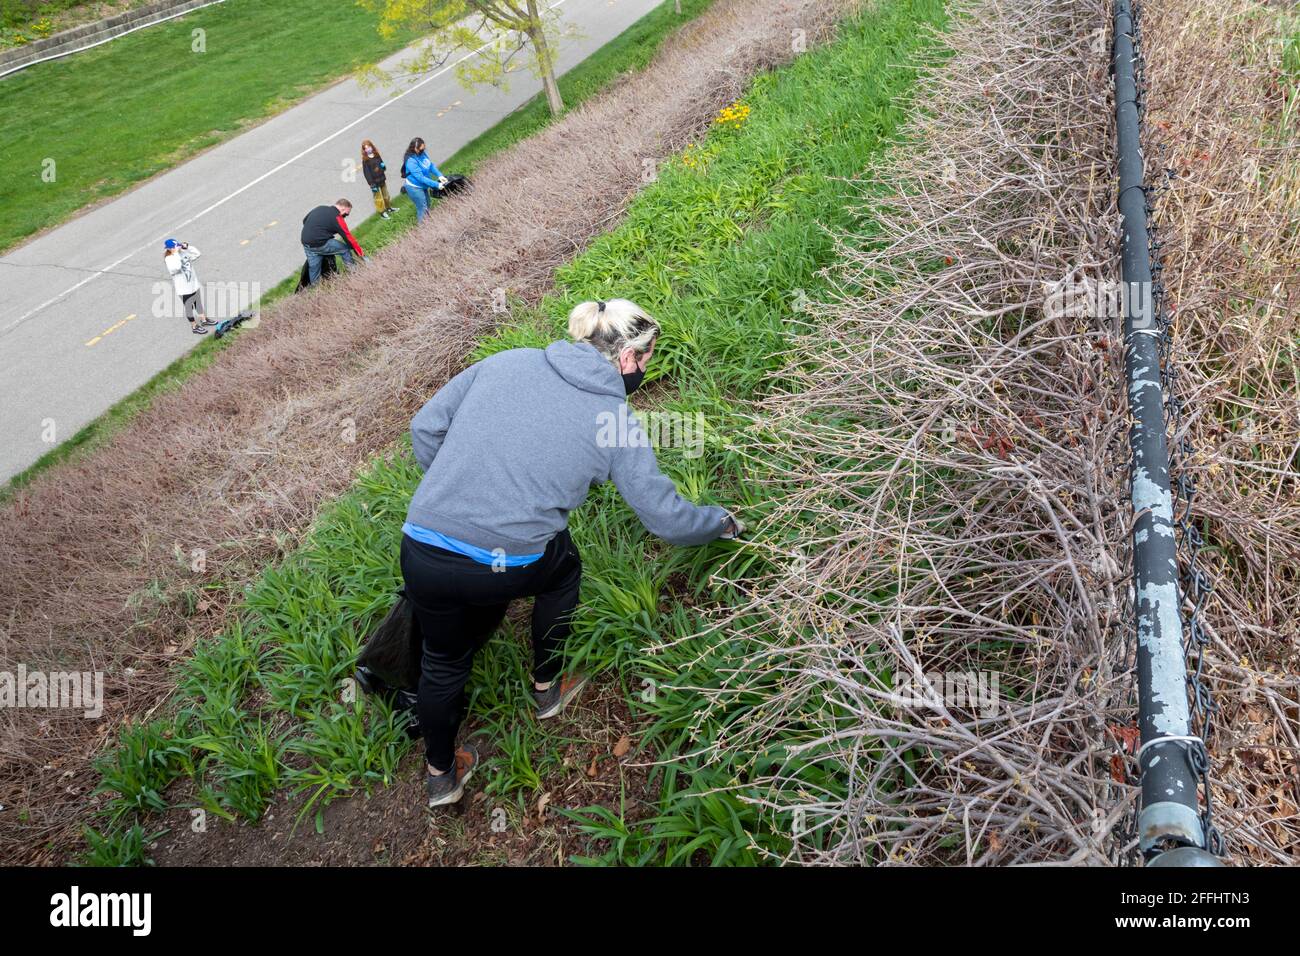 Detroit, Michigan, USA. 24th Apr, 2021. Volunteers clean trash from the Dequindre Cut Greenway walking/biking path as part of Earth Week Spring Cleanup. Credit: Jim West/Alamy Live News Stock Photo